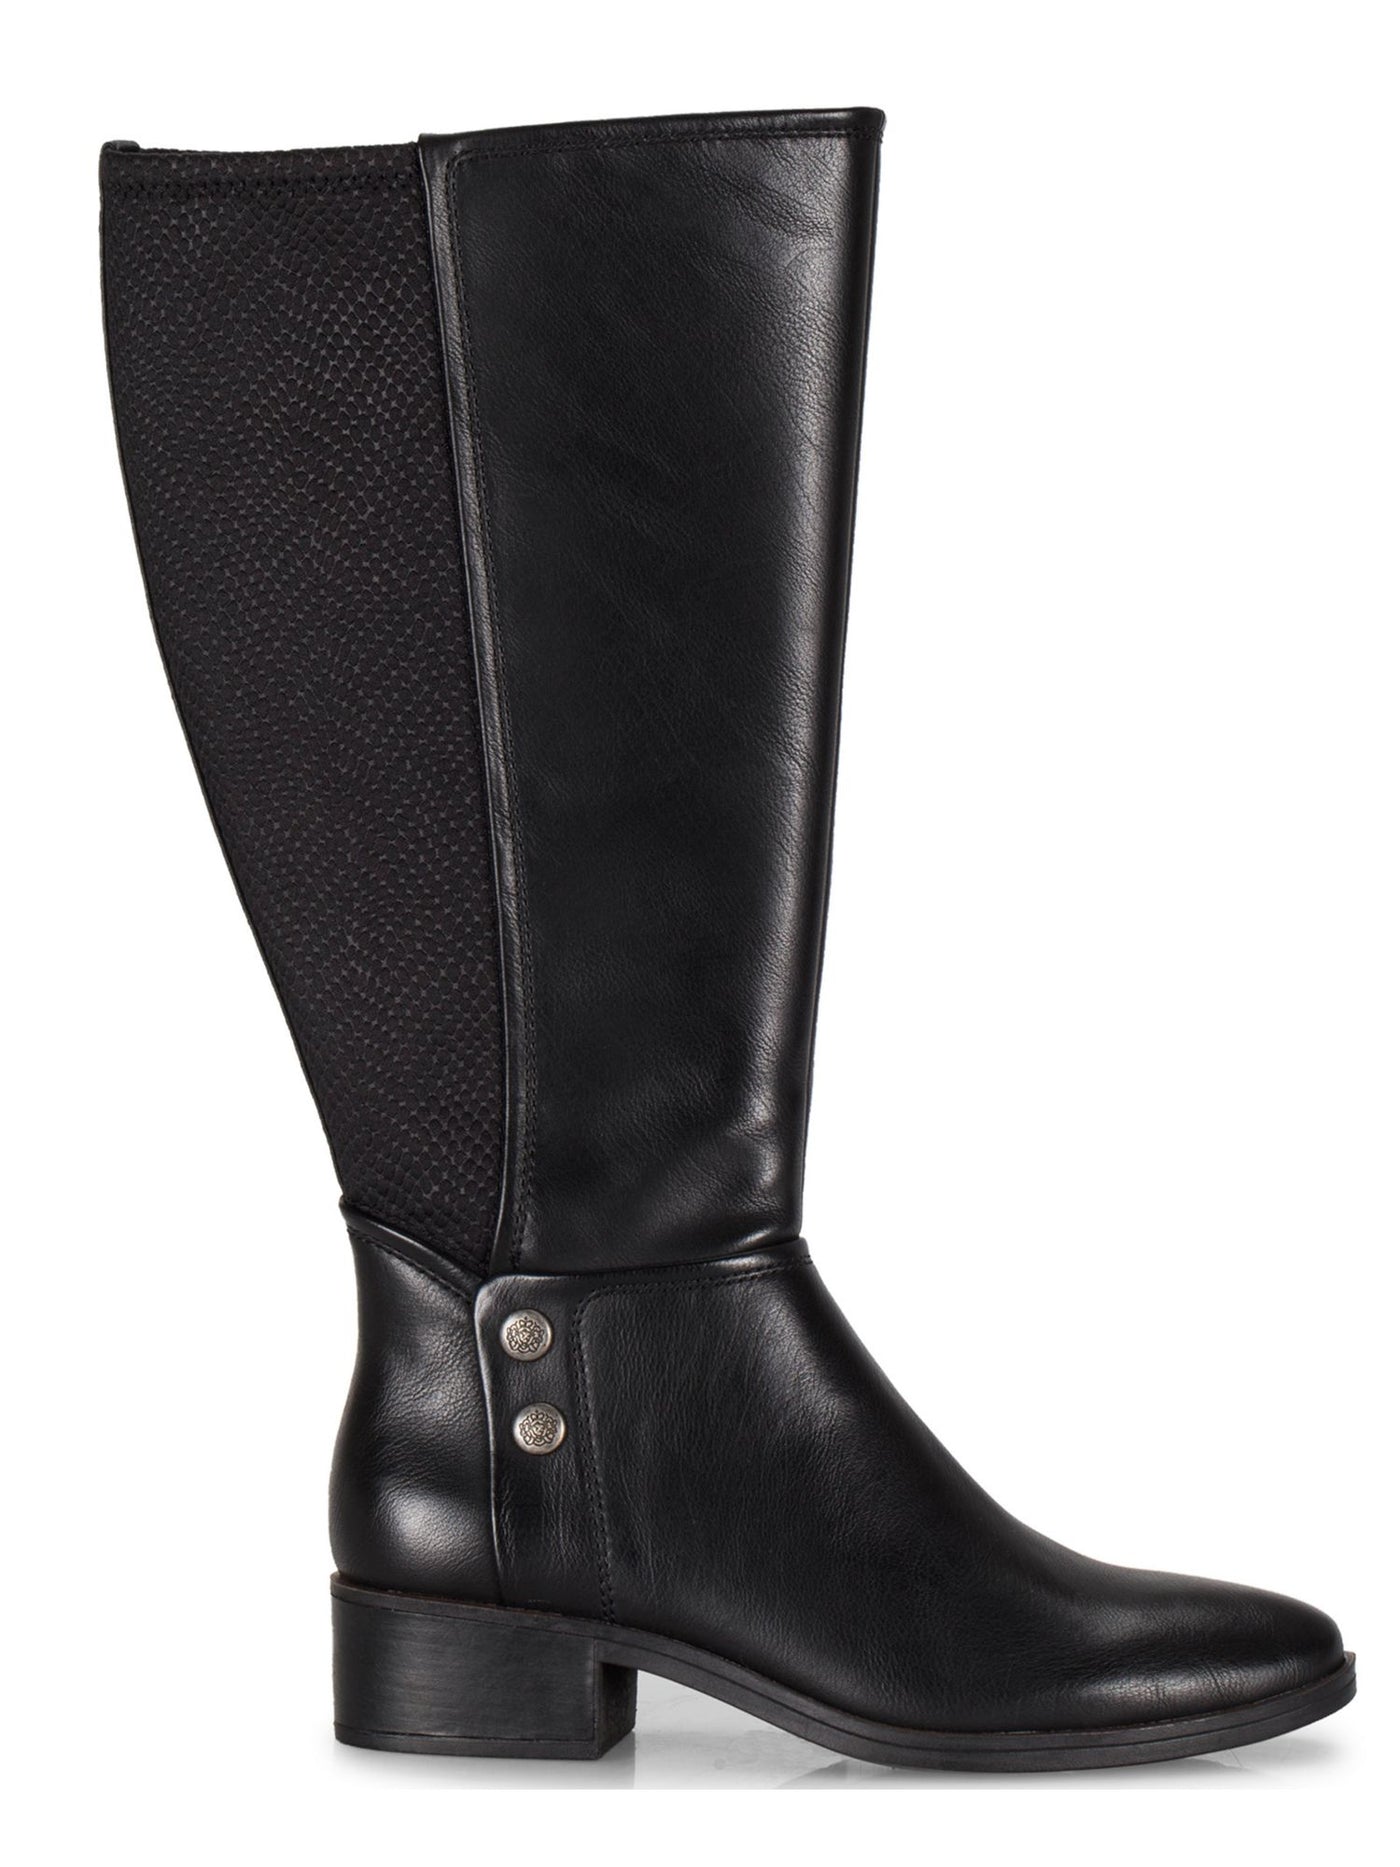 BARETRAPS Womens Black Padded Studded Stretch Madelyn Almond Toe Block Heel Zip-Up Boots 6.5 M